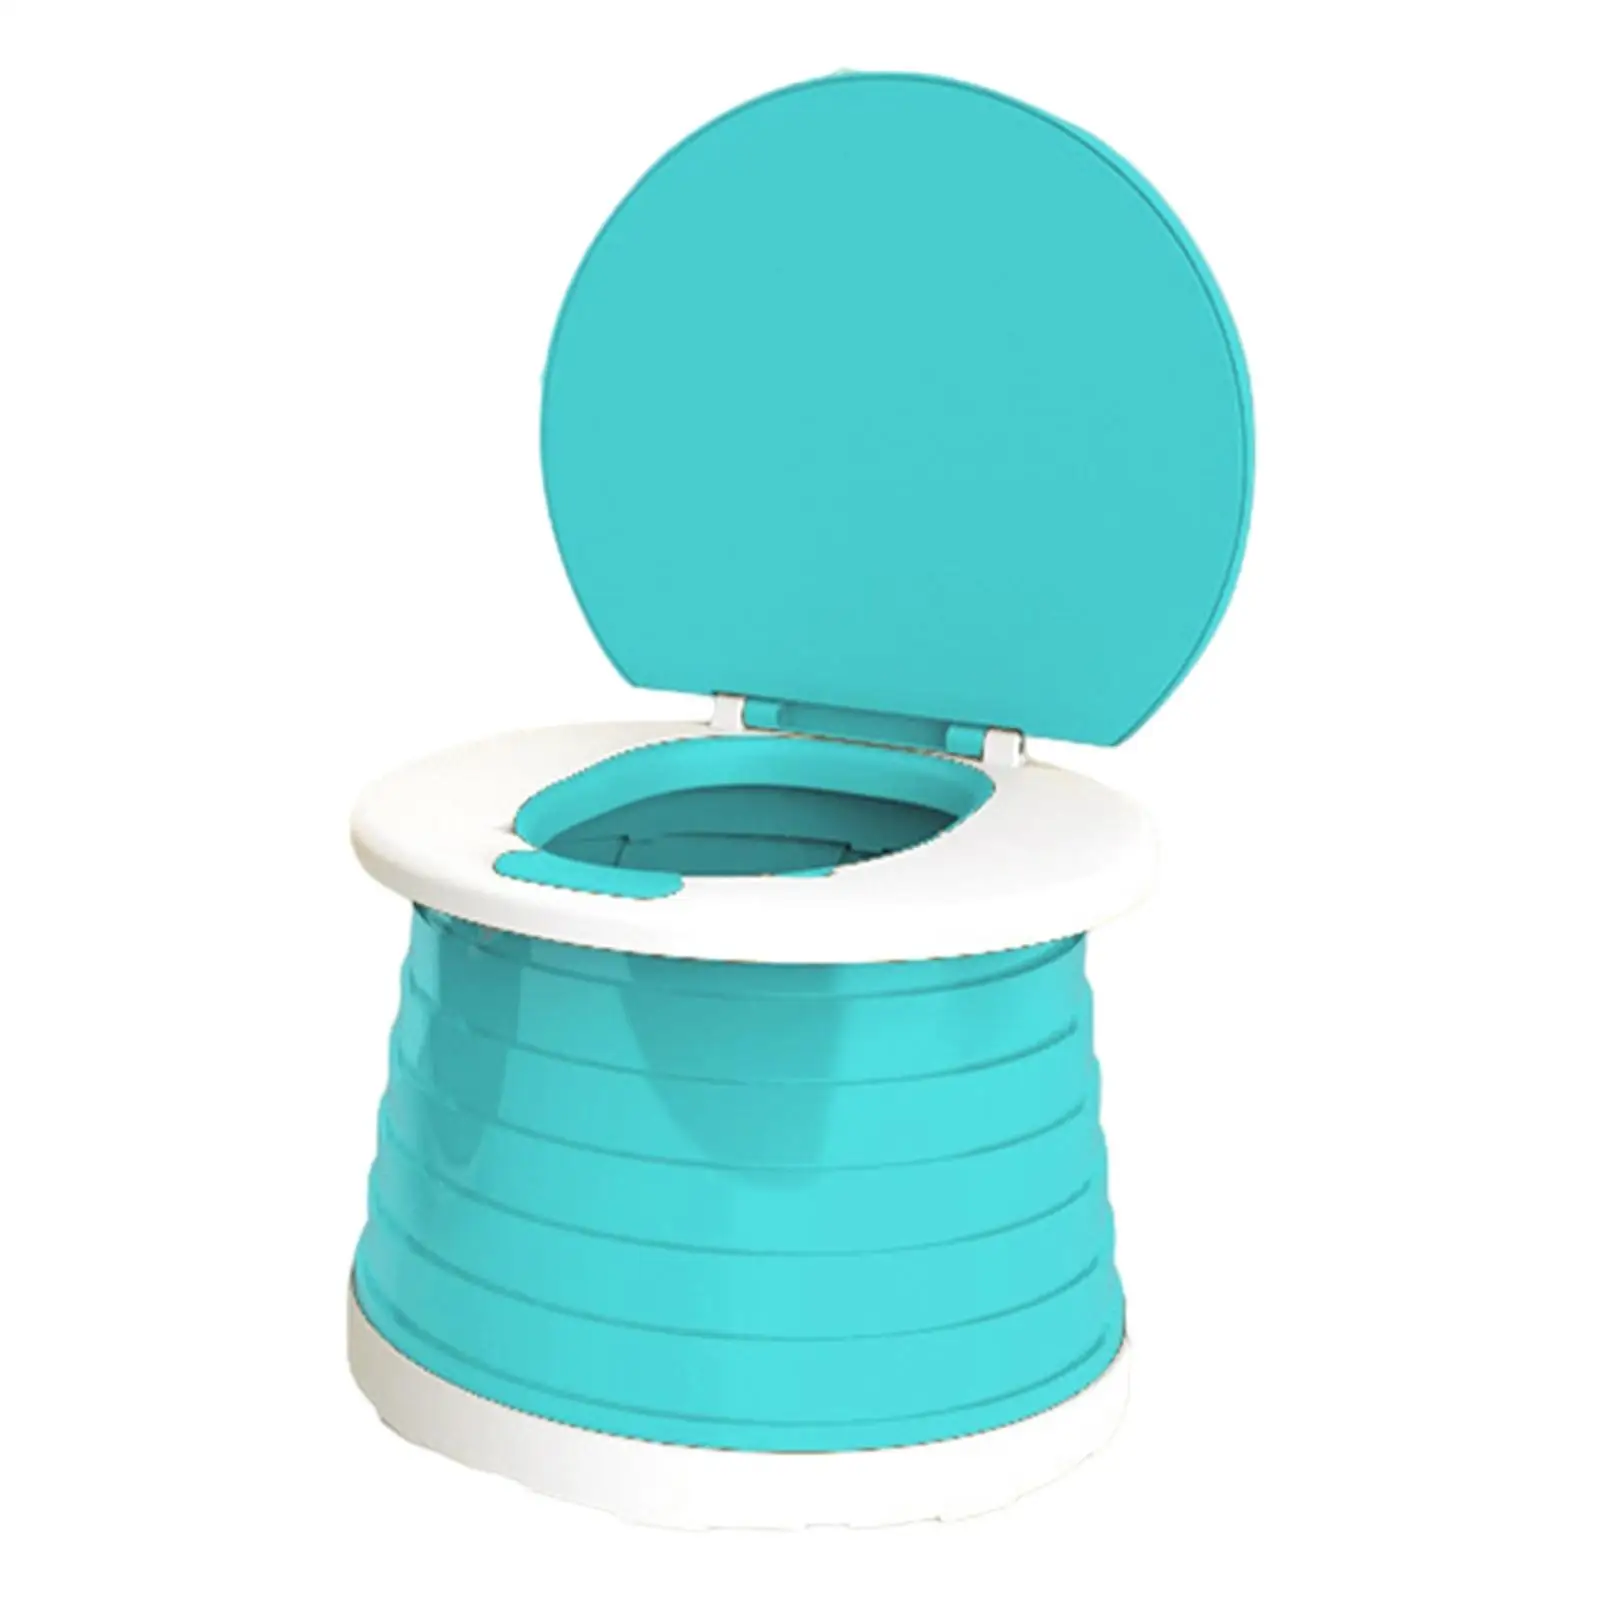 Portable Children Folding Toilet Training seat for kids Potty, Easy to Clean, Multi Function